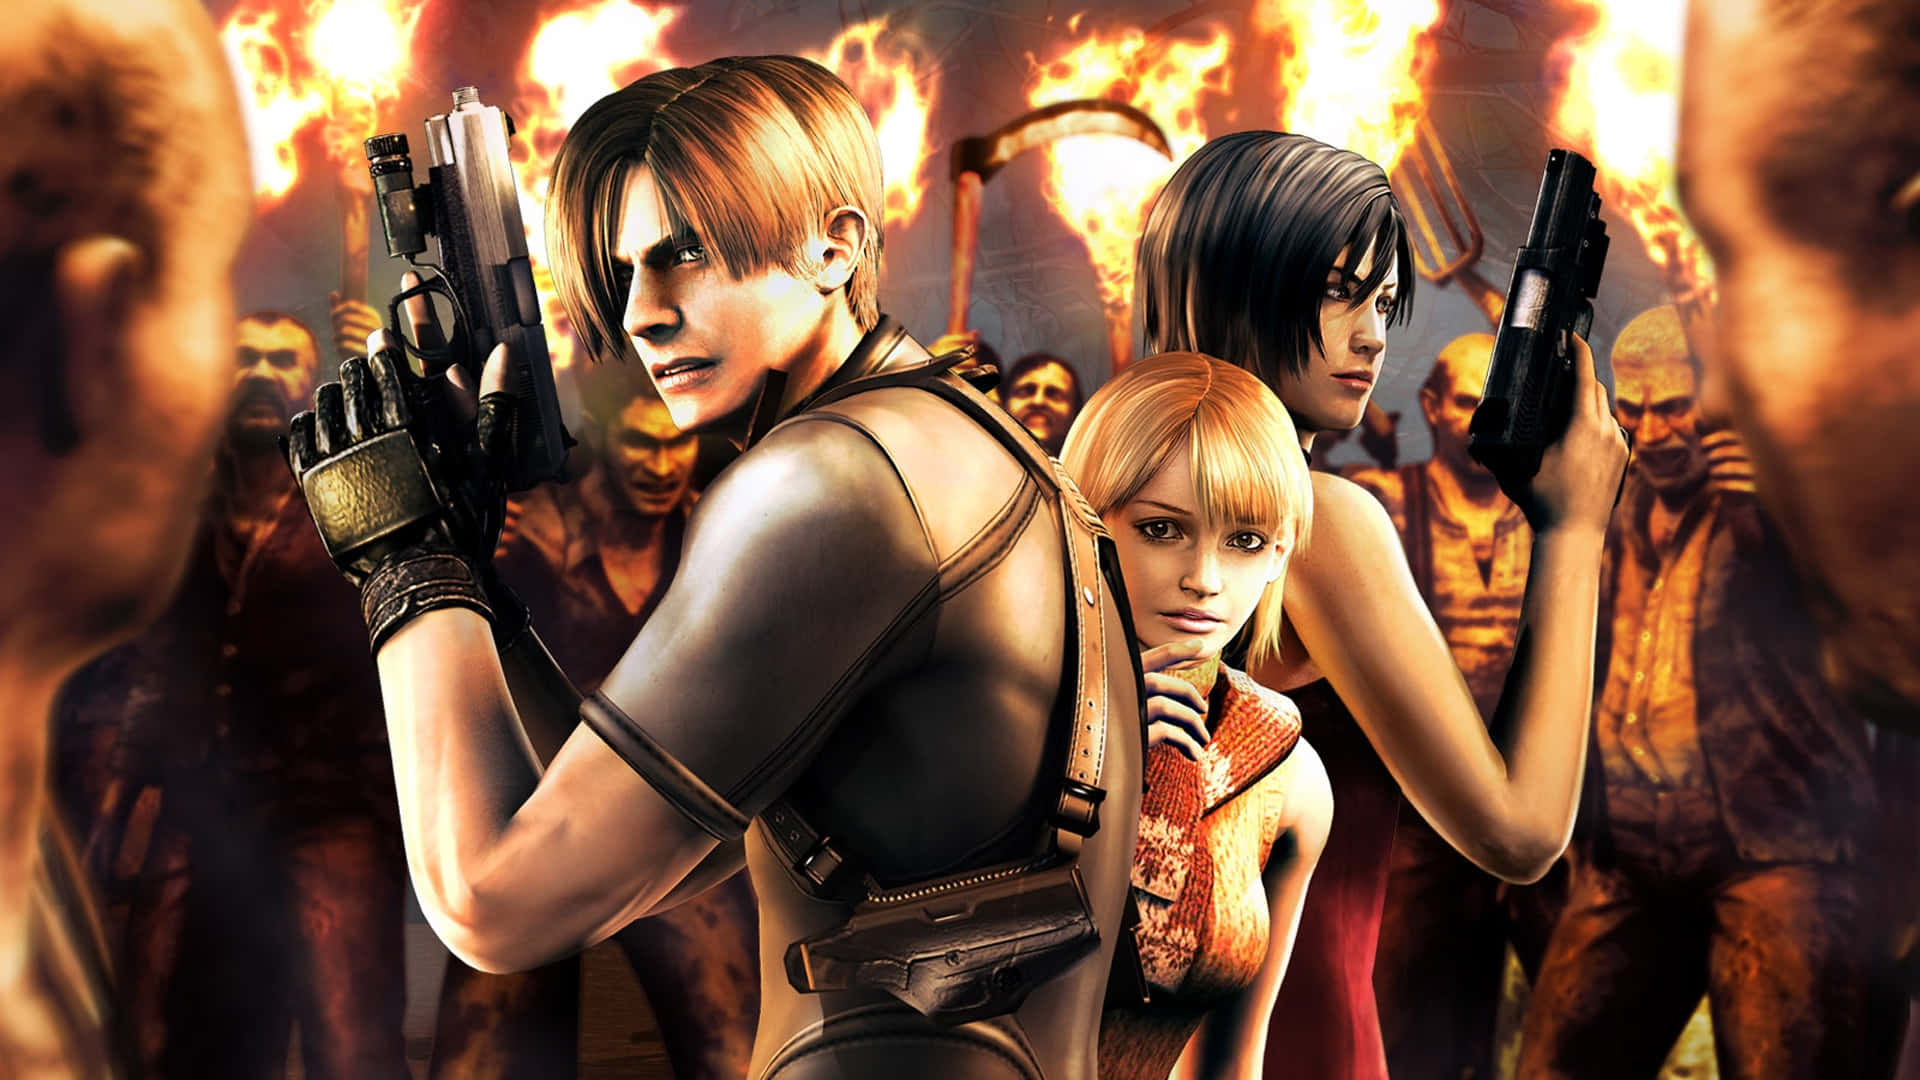 Caption: Resident Evil Characters in Action Wallpaper